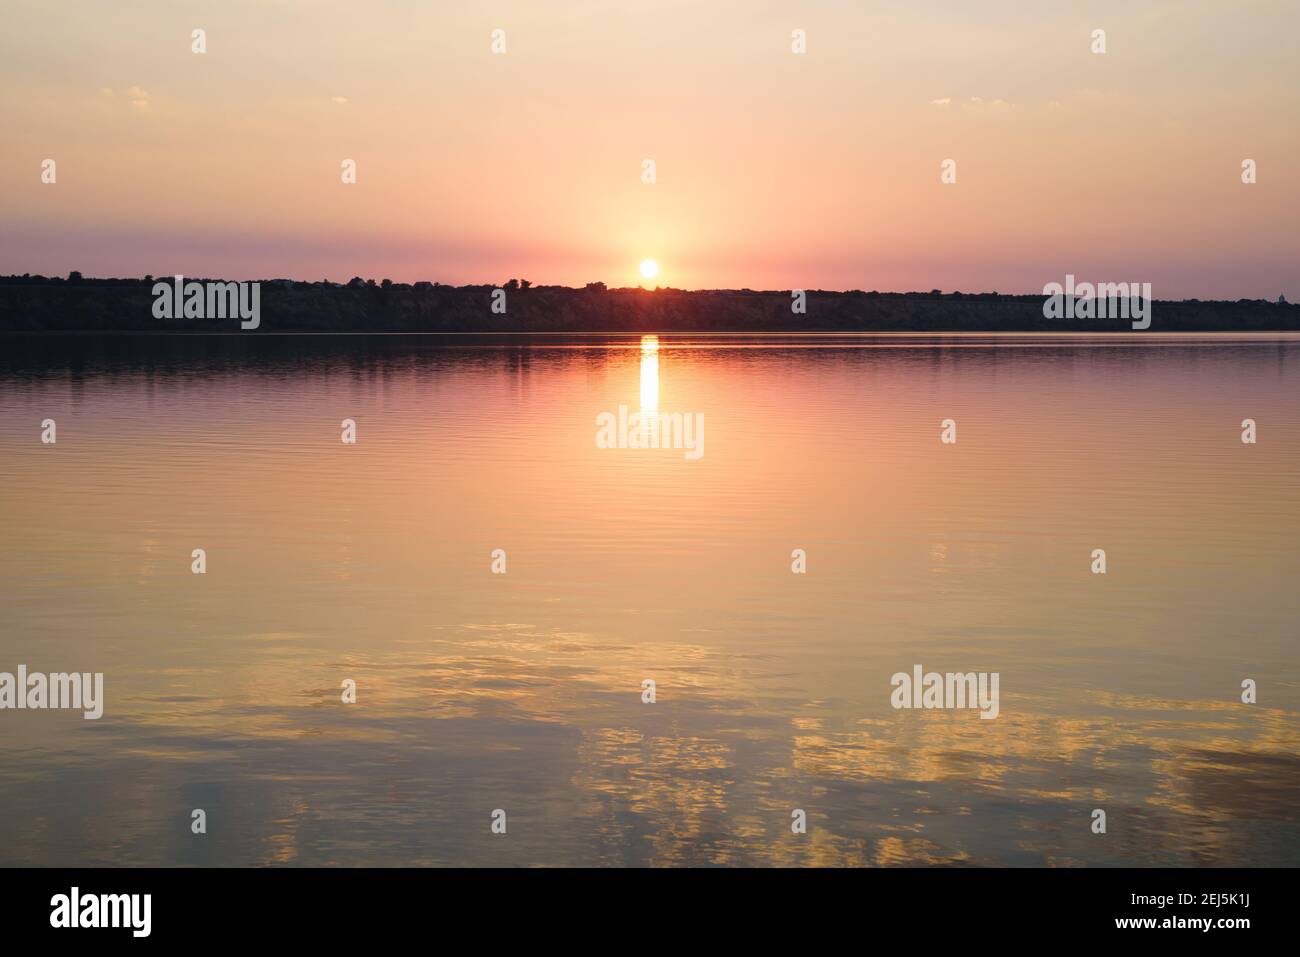 Summer landscape with reflection of colorful sunset in the lake Stock Photo